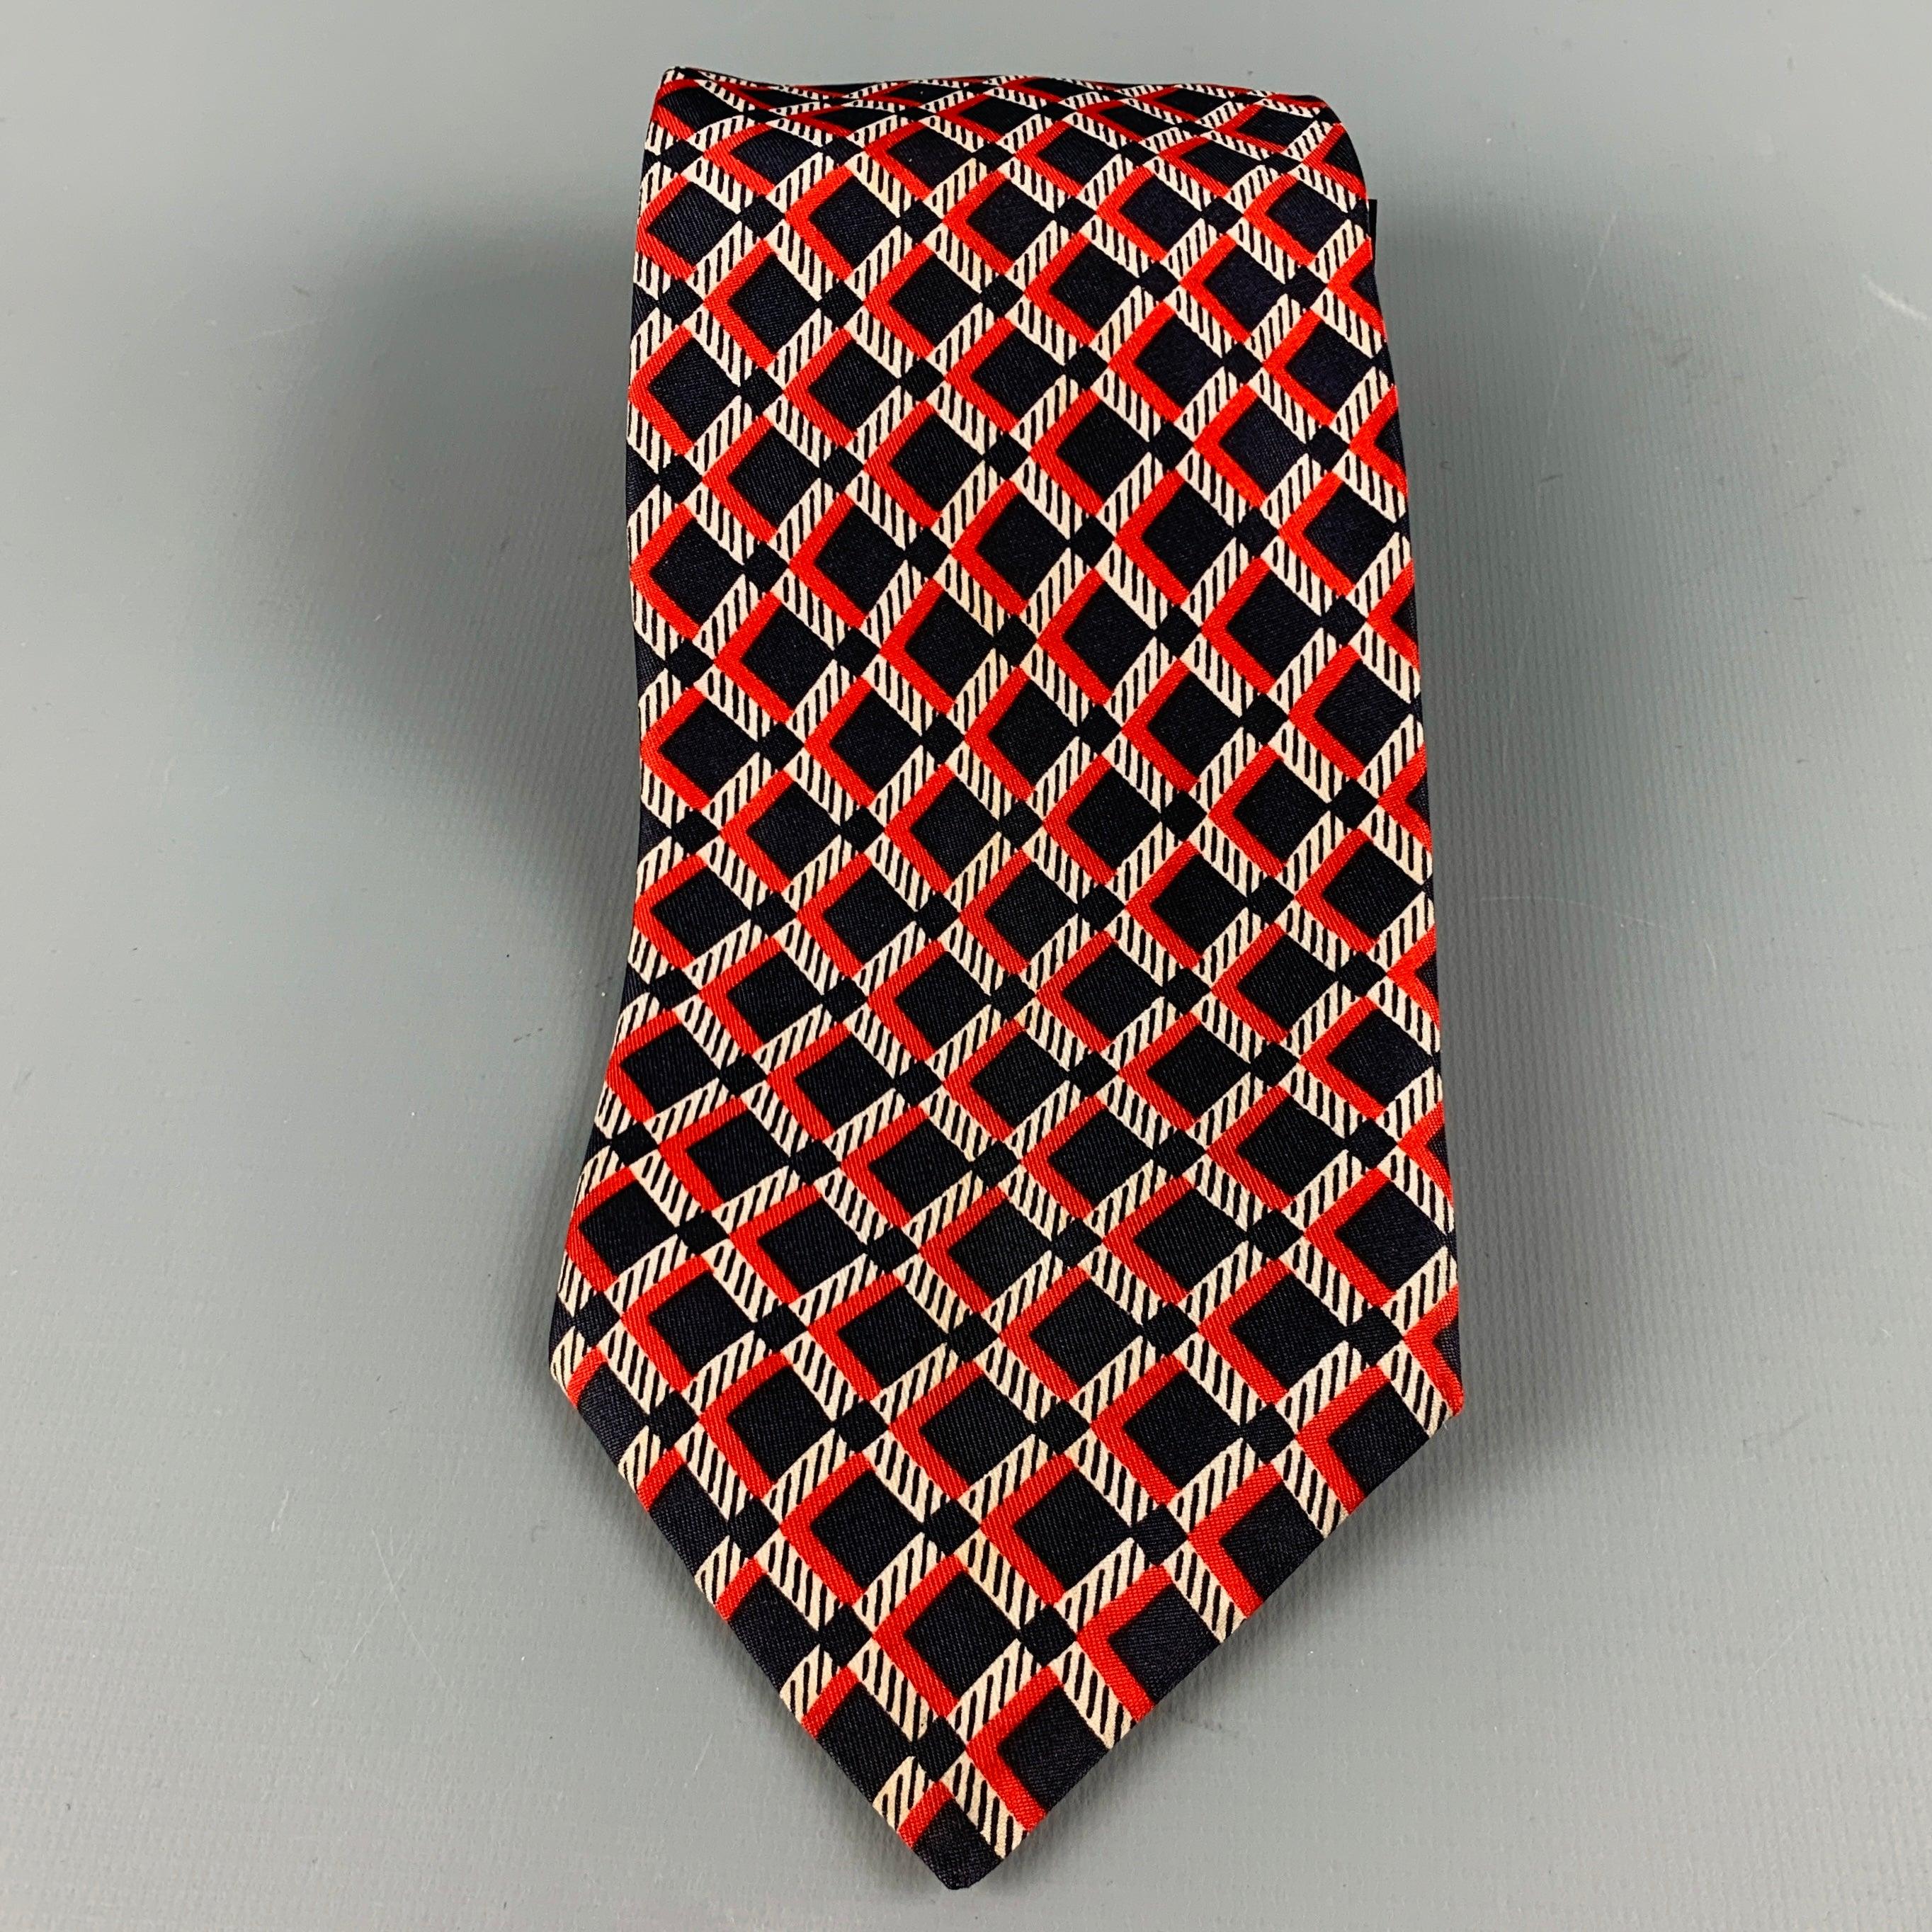 VALENTINO
necktie in a navy and red silk fabric featuring checkered pattern. Made in Italy.Excellent Pre-Owned Condition. 

Measurements: 
  Width: 3.5 inches Length: 54 inches 
  
  
 
Reference No.: 128756
Category: Tie
More Details
    
Brand: 